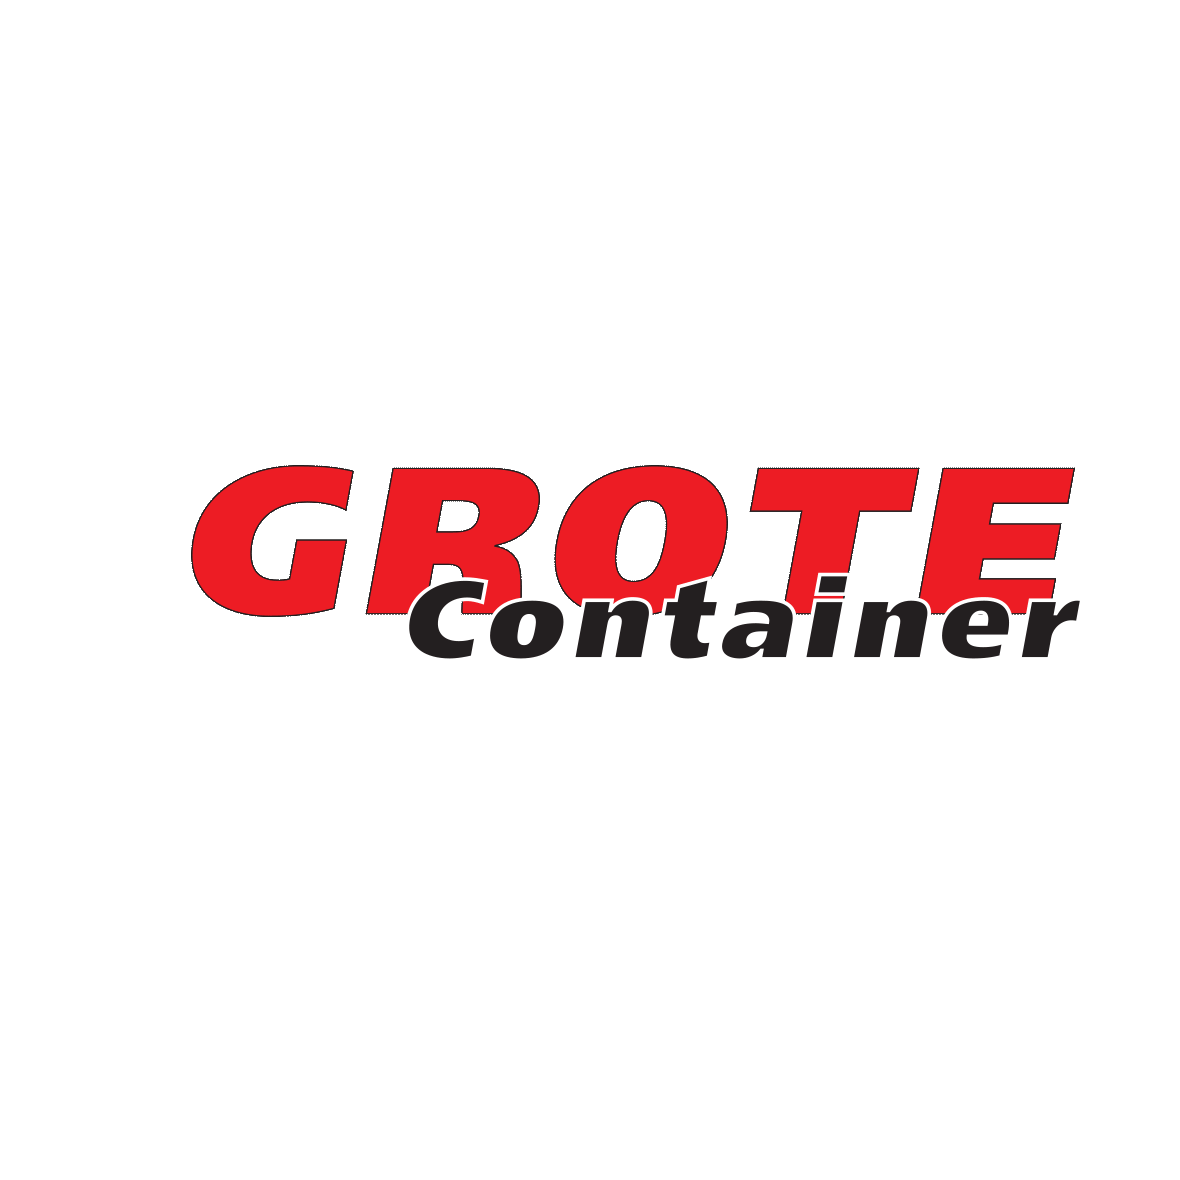 Grote Container Logo